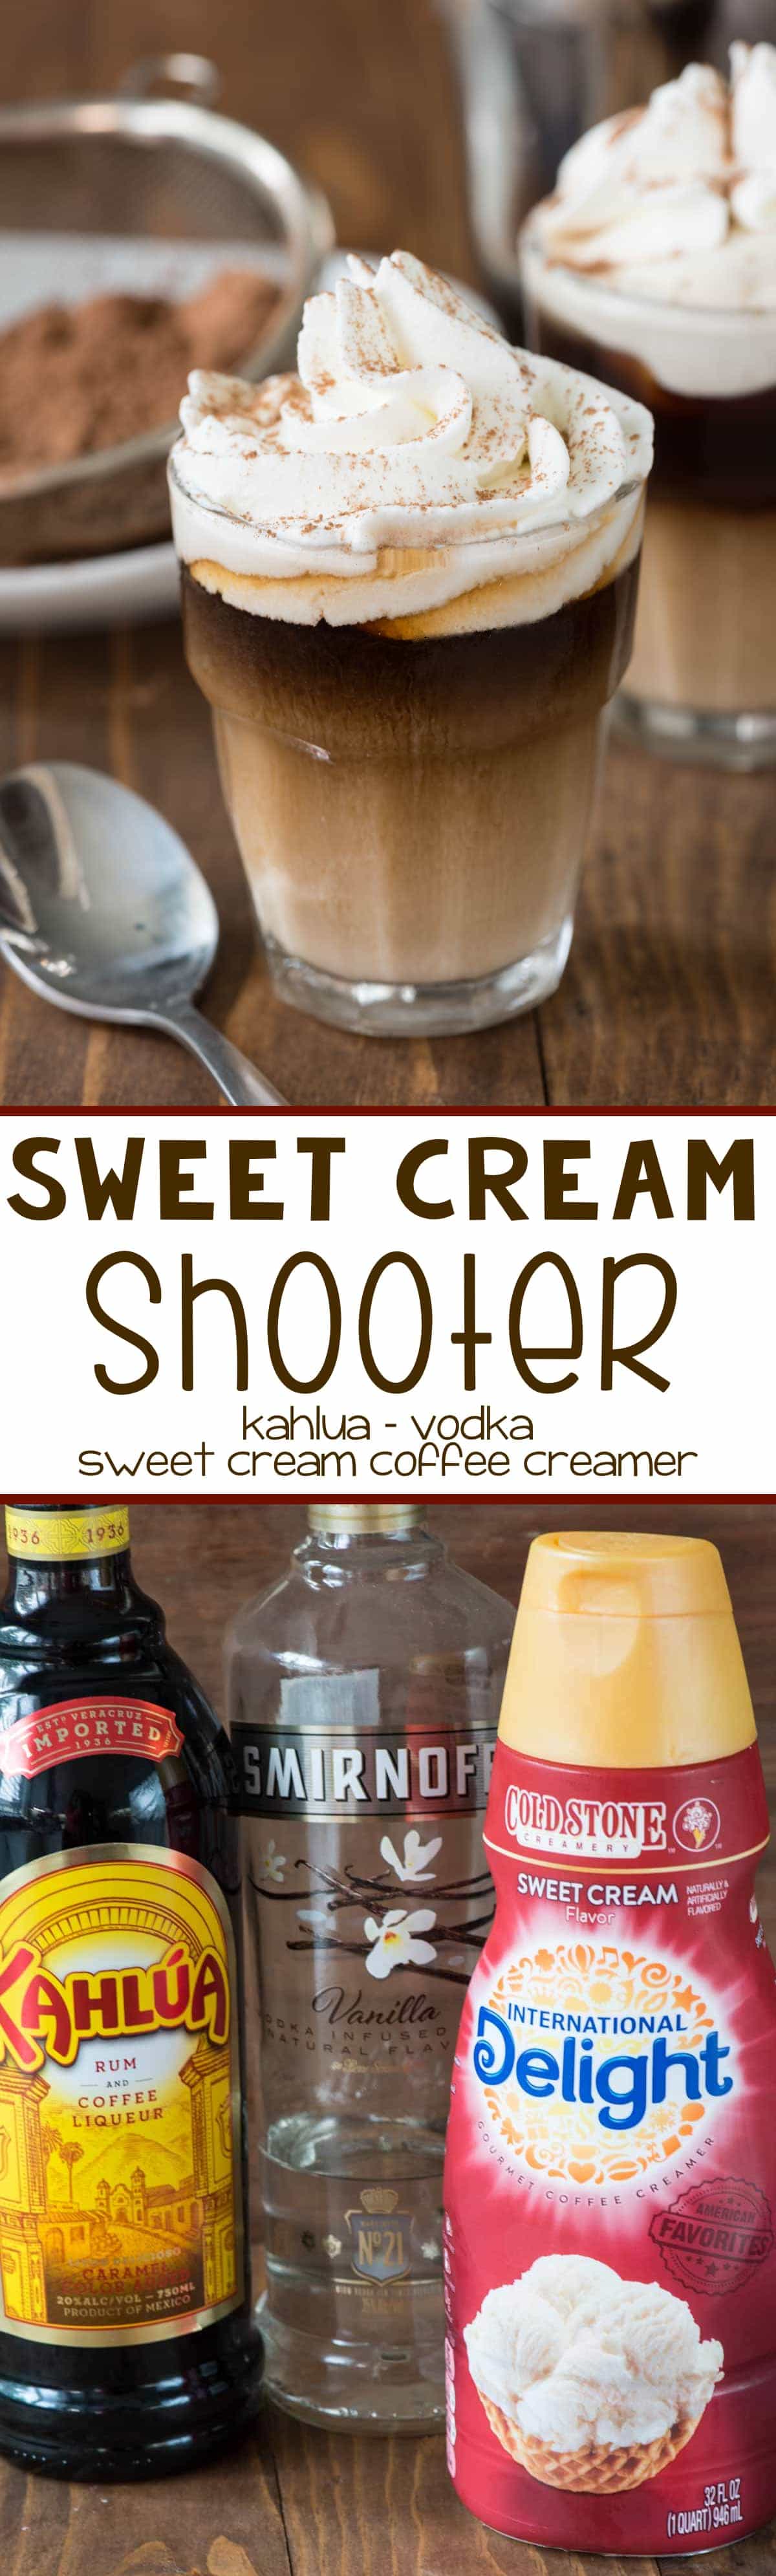 Sweet Cream Shooter - this is the perfect after dinner drink recipe! Only 3 ingredients it's great for dessert!